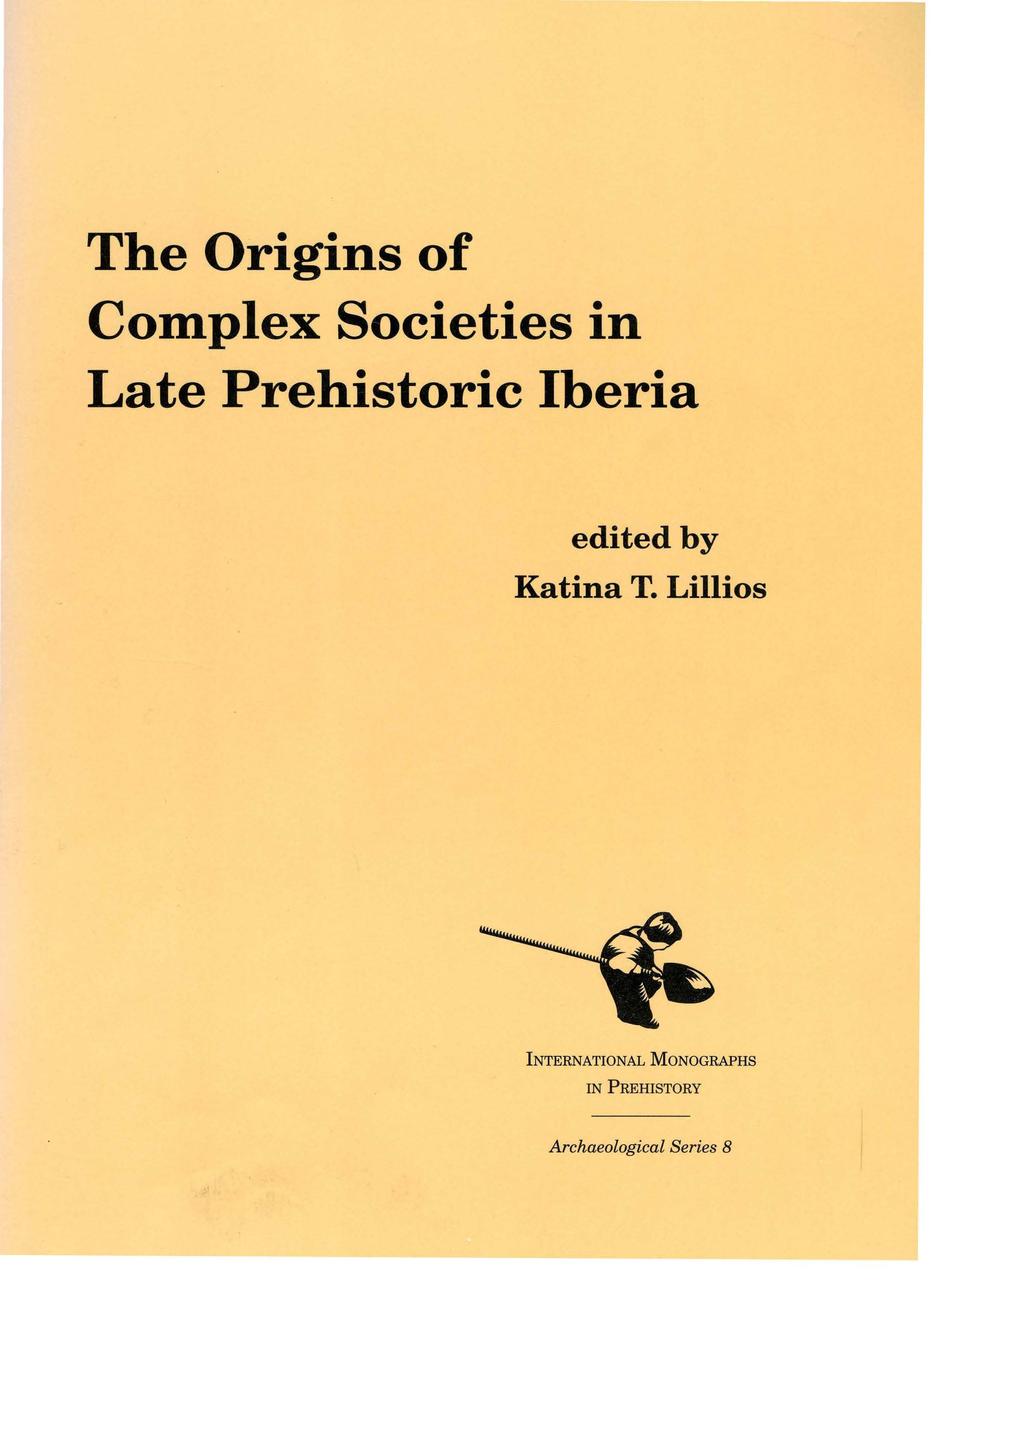 The Origins of Complex Societies in Late Prehistoric Iberia edited by